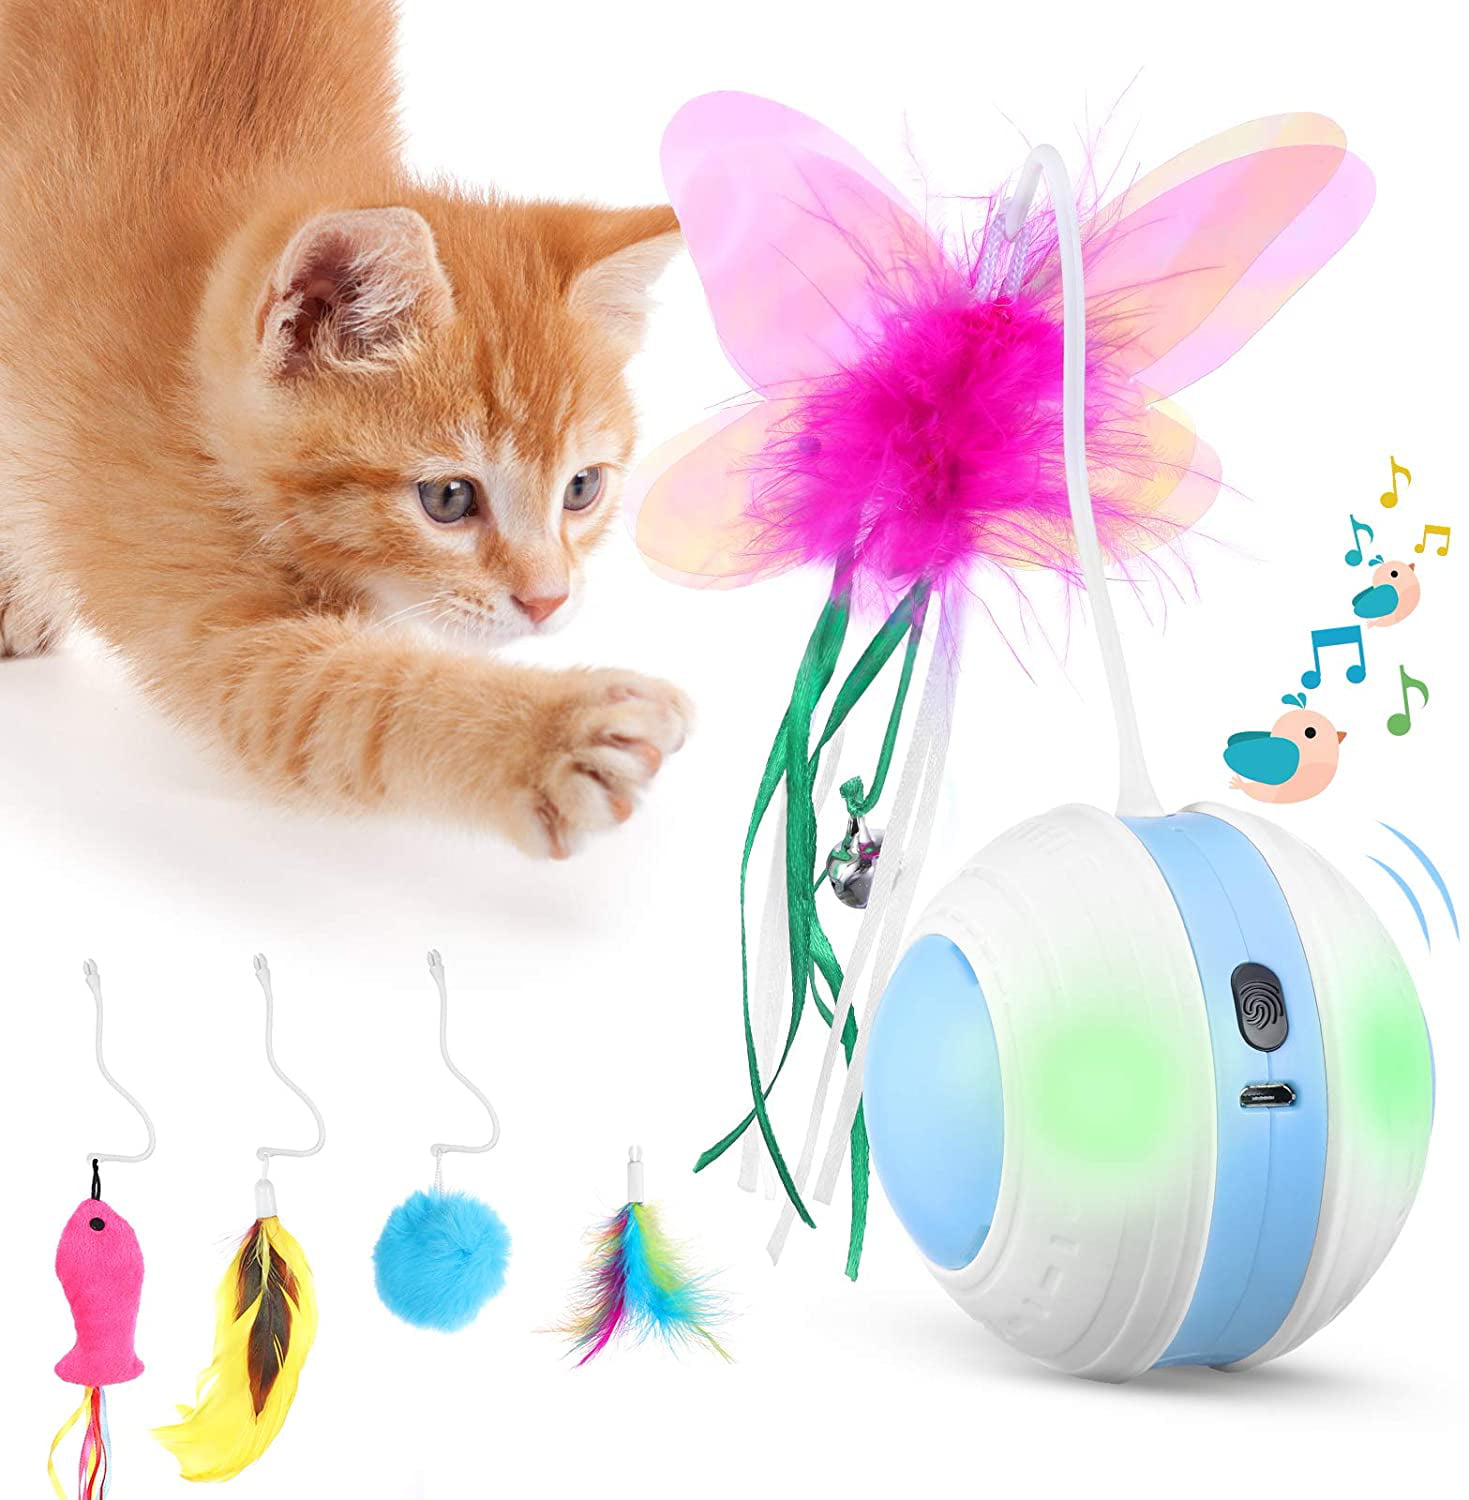 Black 2 in 1 Interactive Cat Toys Automatic 360 Degree Rotation Cat Ball Toy Automatic Lifting Cat Chaser Feather Toy